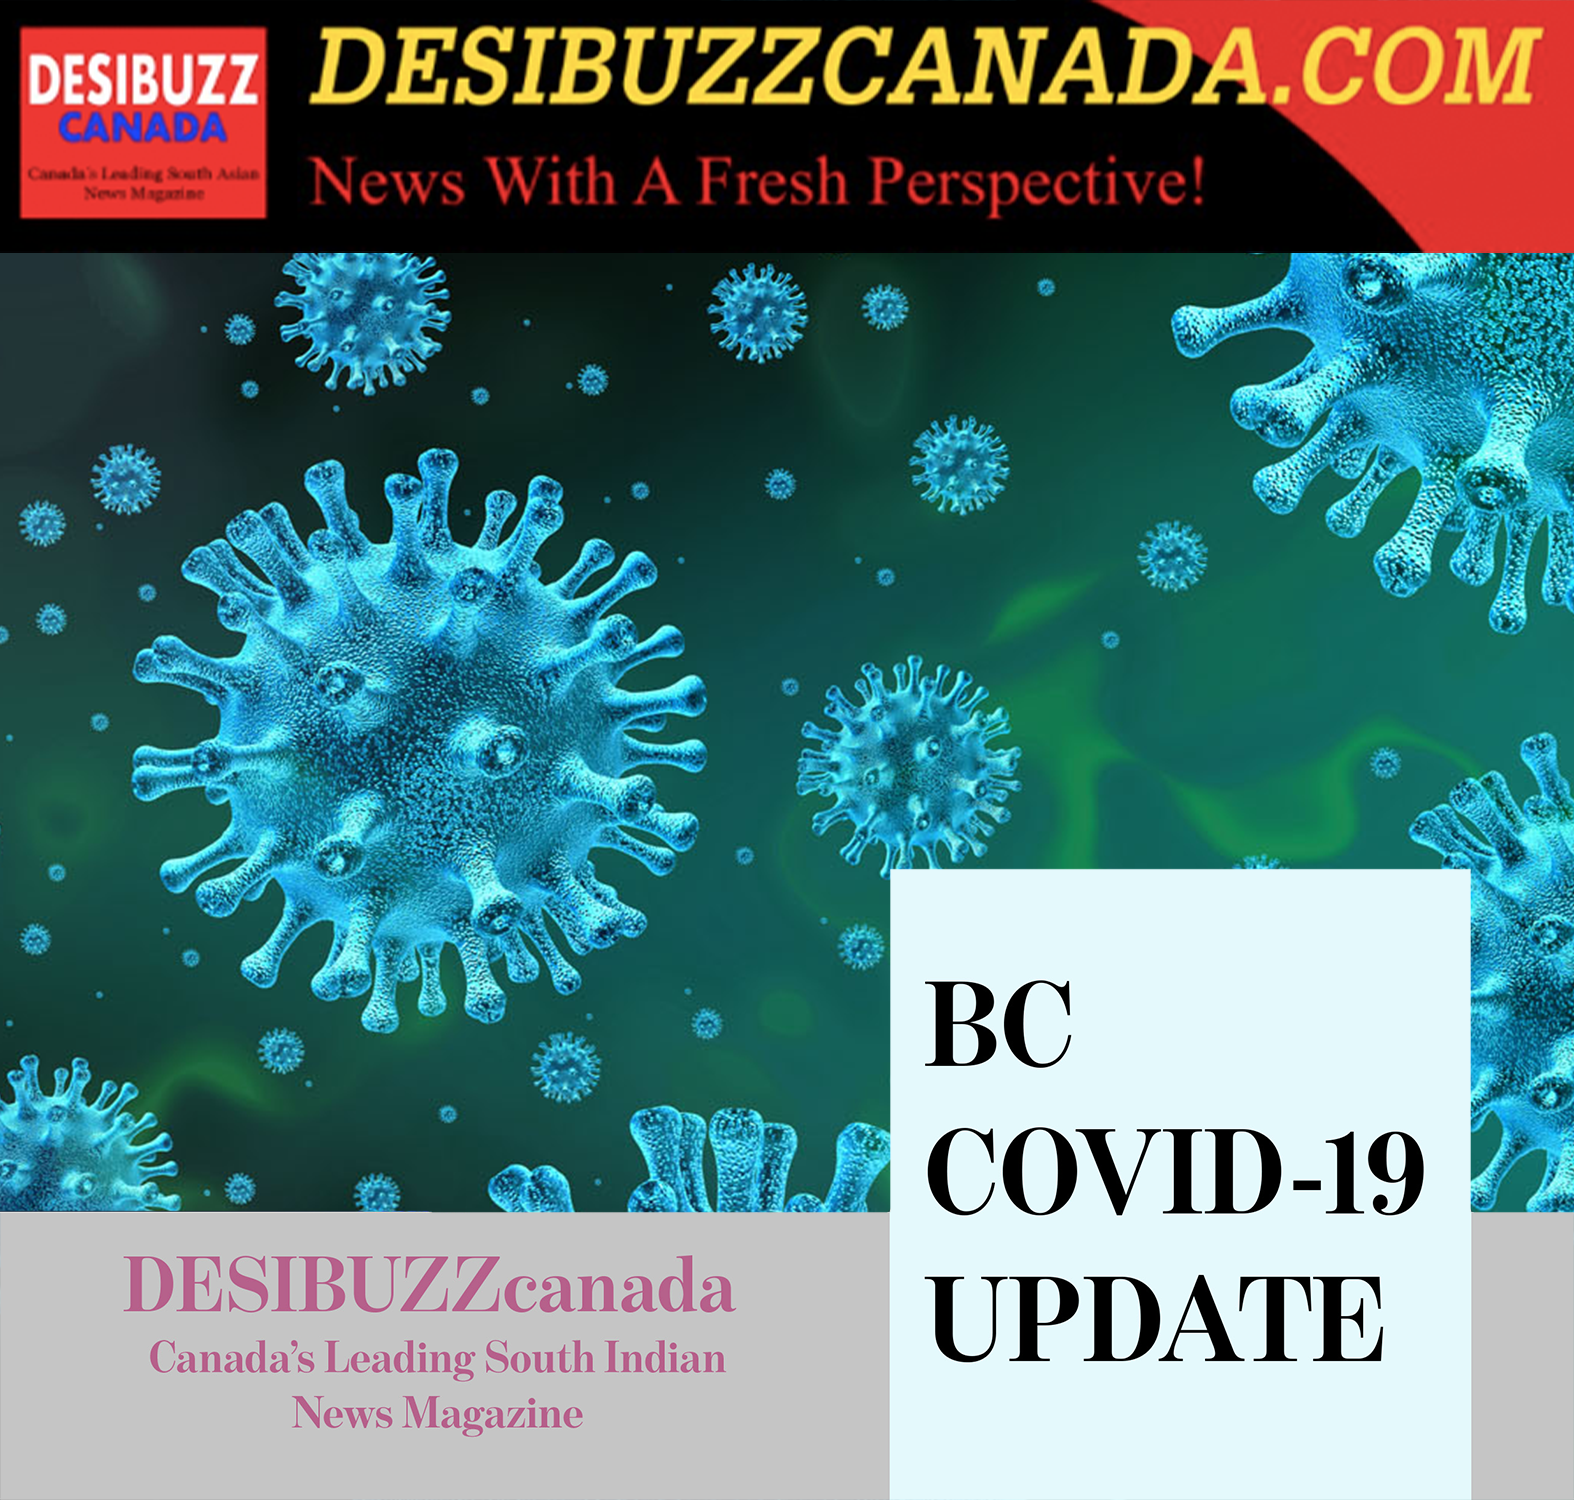 BC COVID-19 UPDATE: Over 400 Cases But No Deaths Reported Tuesday